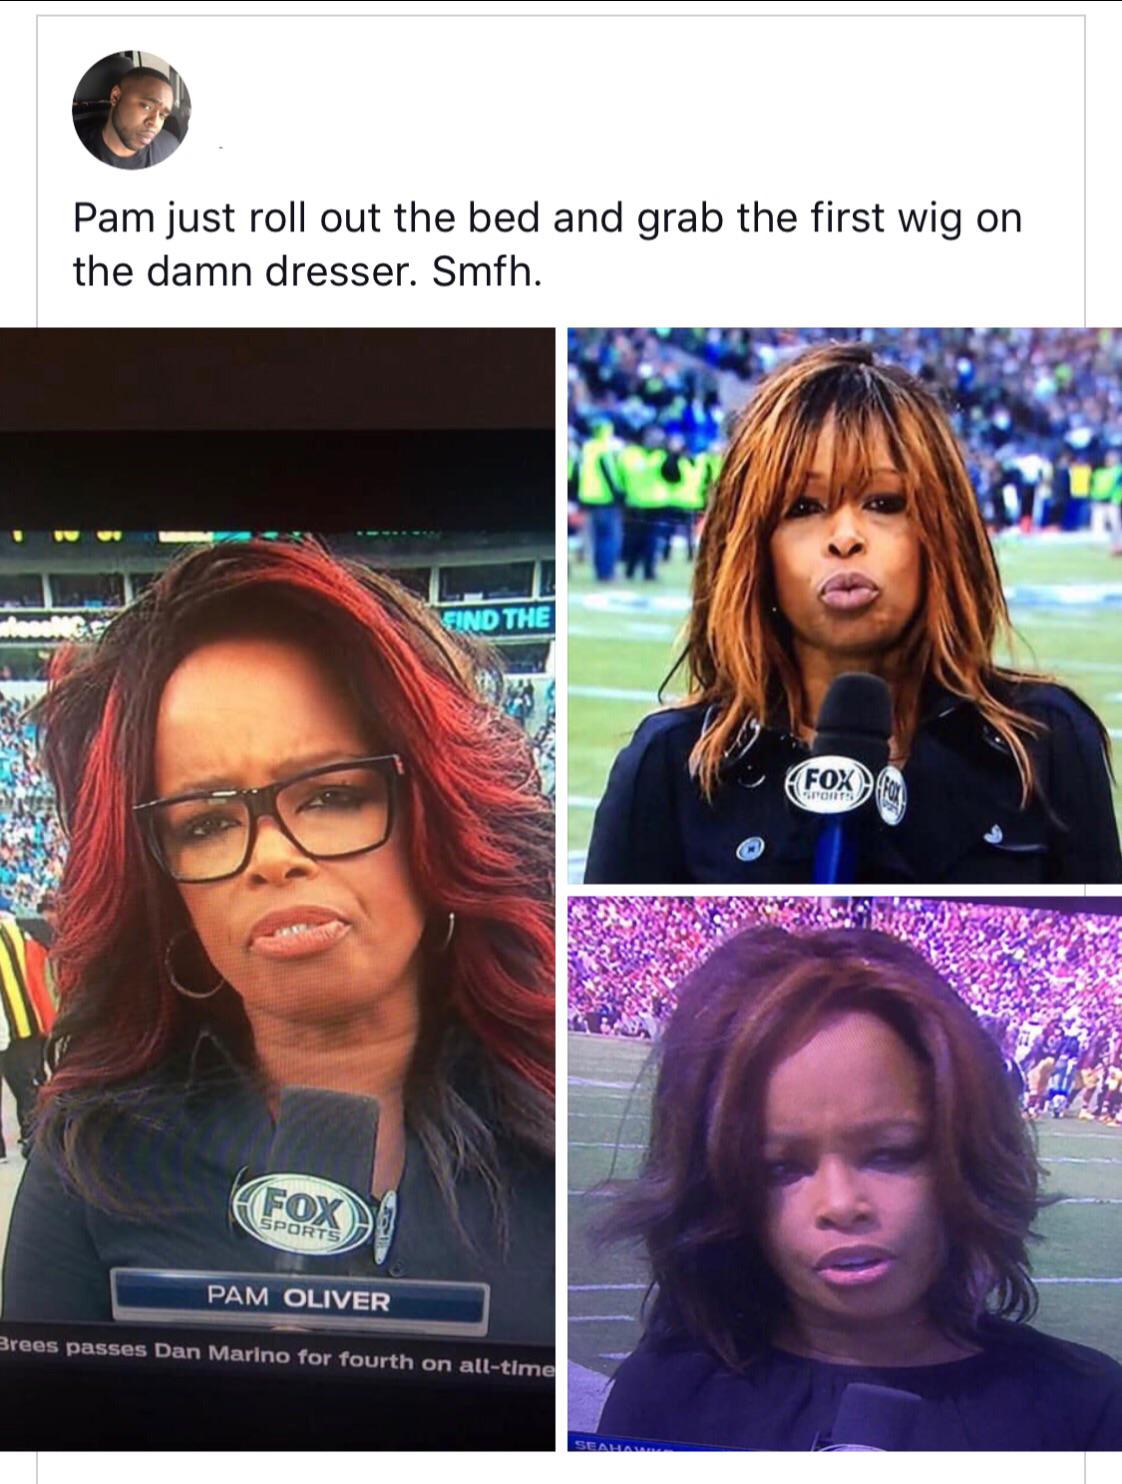 hair coloring - Pam just roll out the bed and grab the first wig on the damn dresser. Smfh. Find The Fox Sports Pam Oliver Brees passes Dan Marino for fourth on alltime